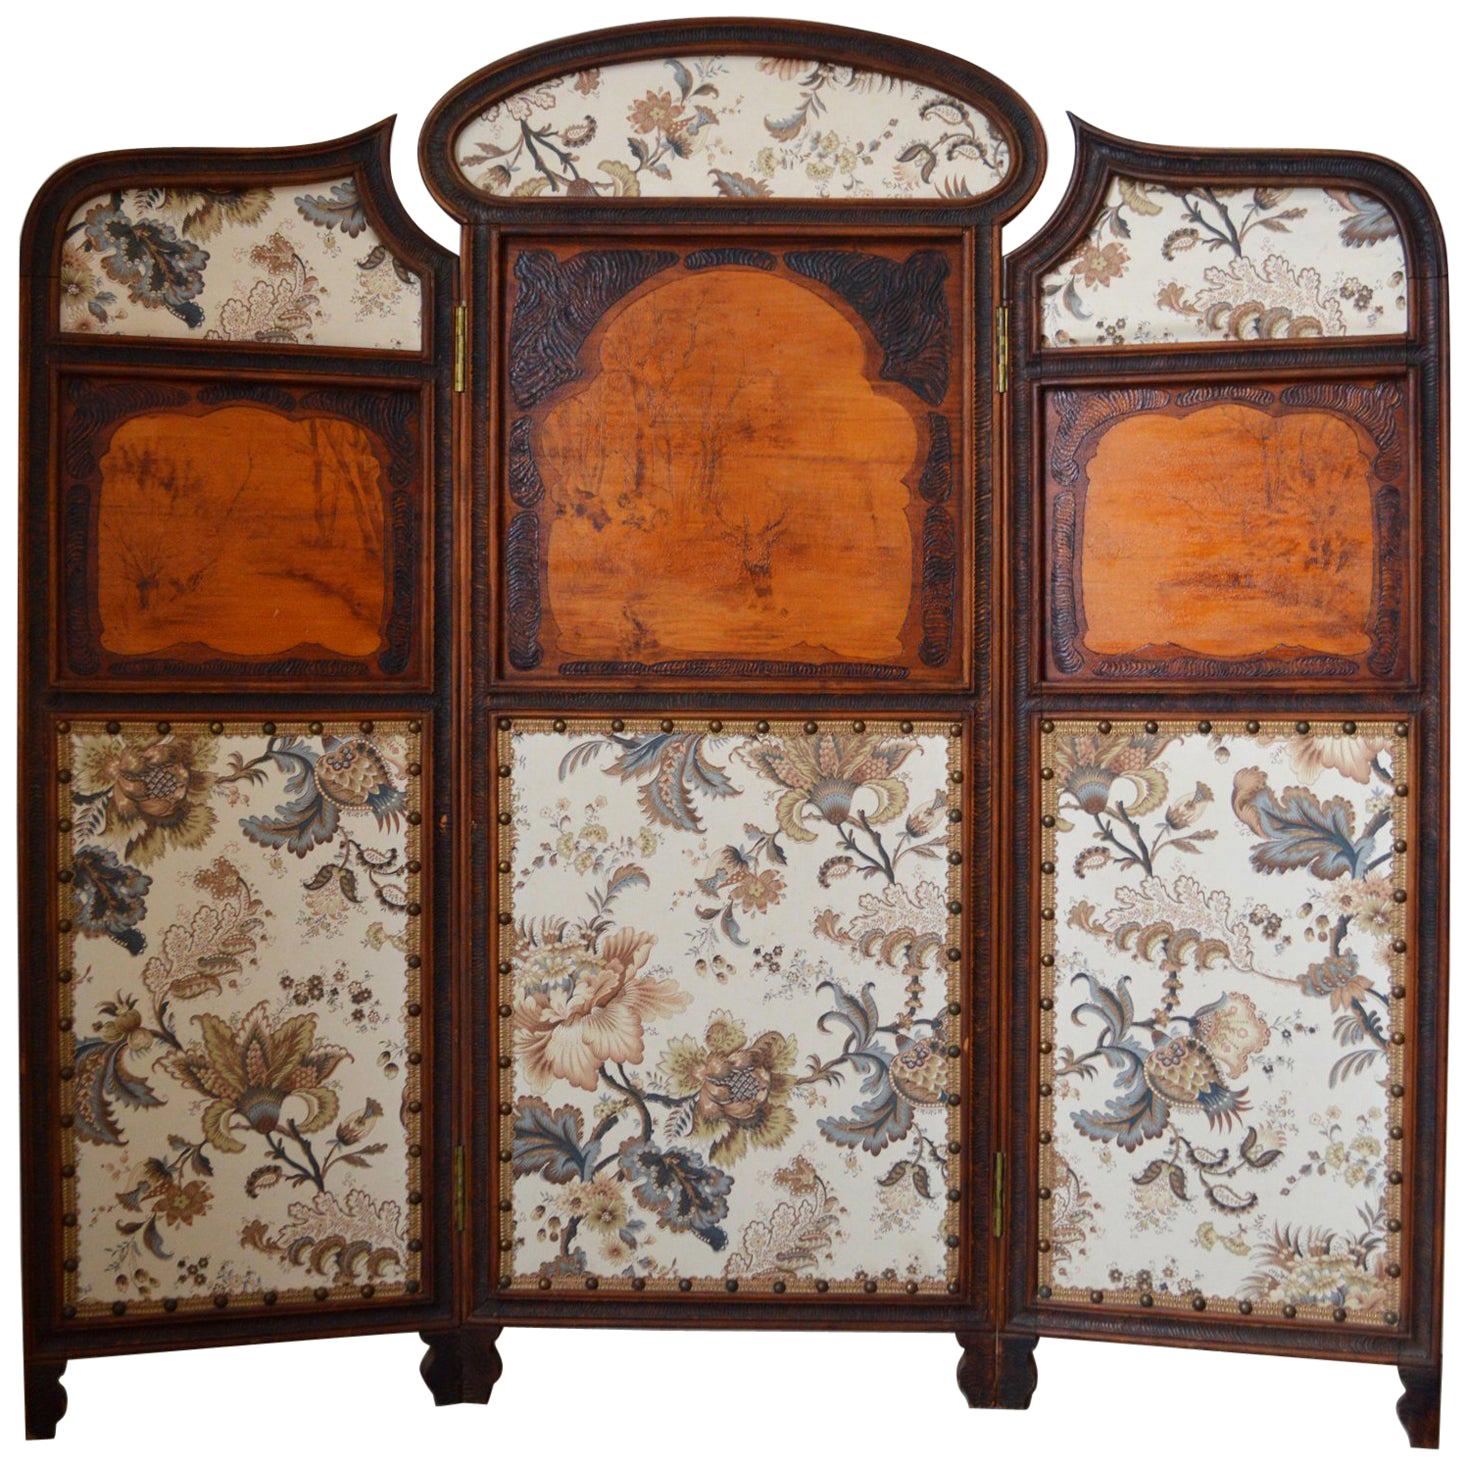 Art Nouveau Three-Panel Folding Screen or Room Divider in Carved Wood circa 1900 For Sale